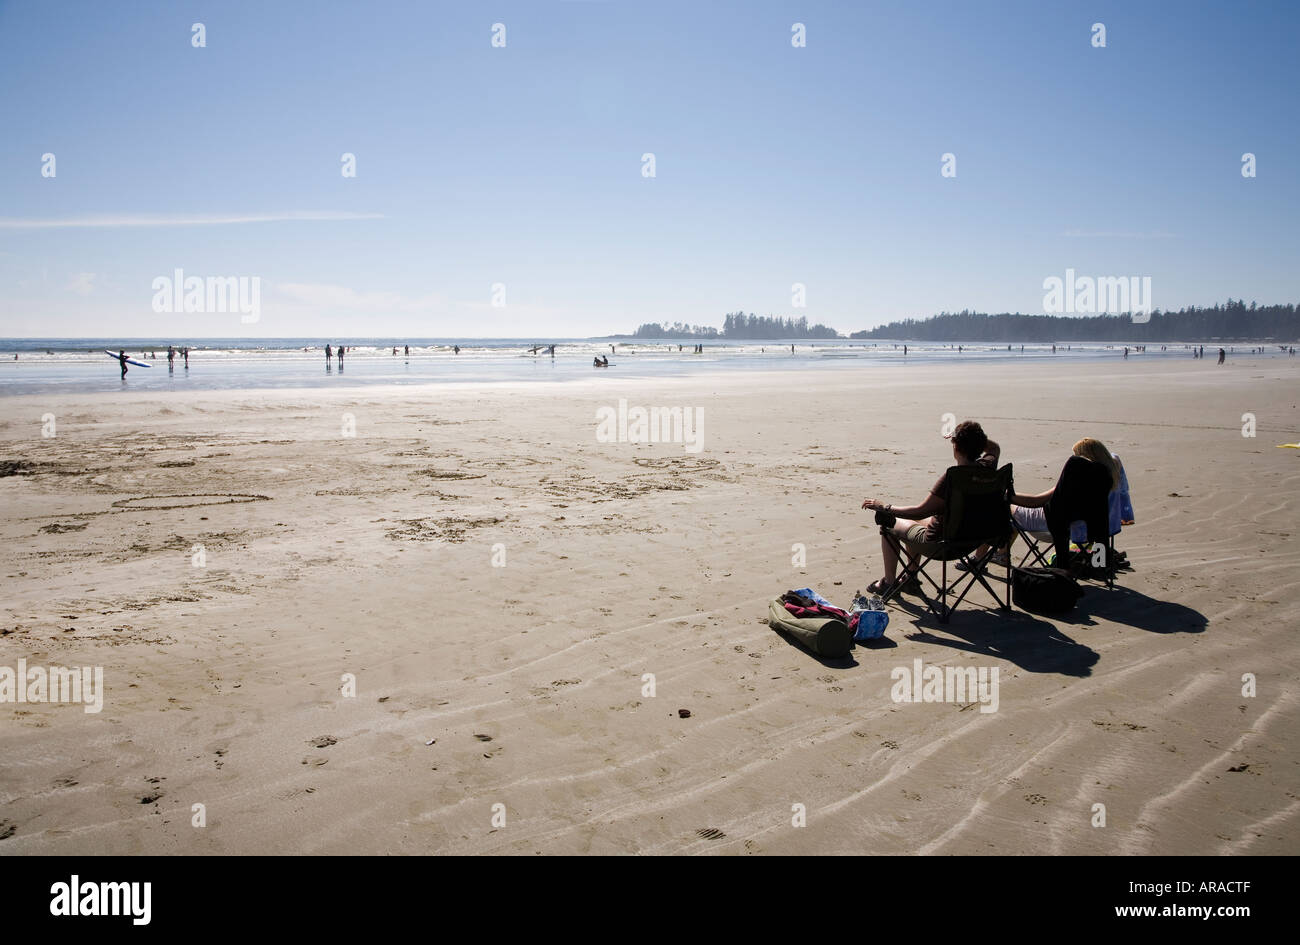 Two people in chairs watching surfers and swimmers Long Beach Pacific Rim national park reserve Vancouver island Canada Stock Photo